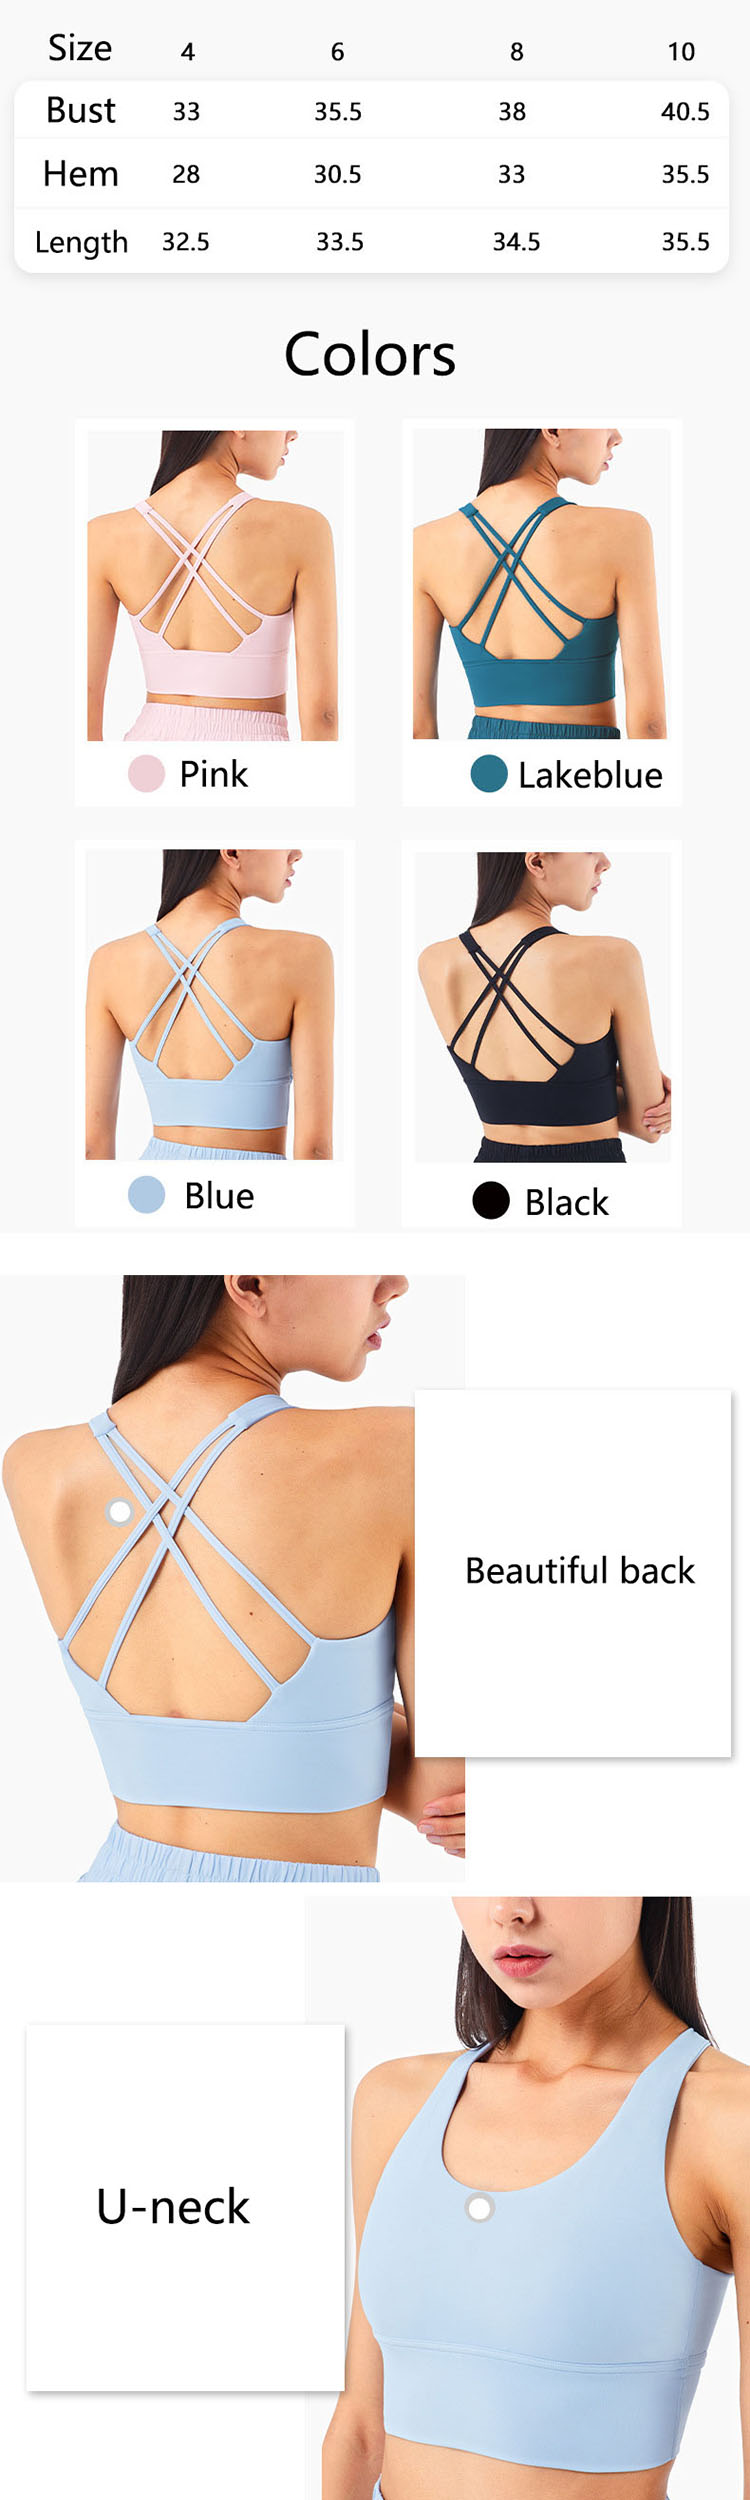 Adopting a beautiful back design, the supporting force is more stable.